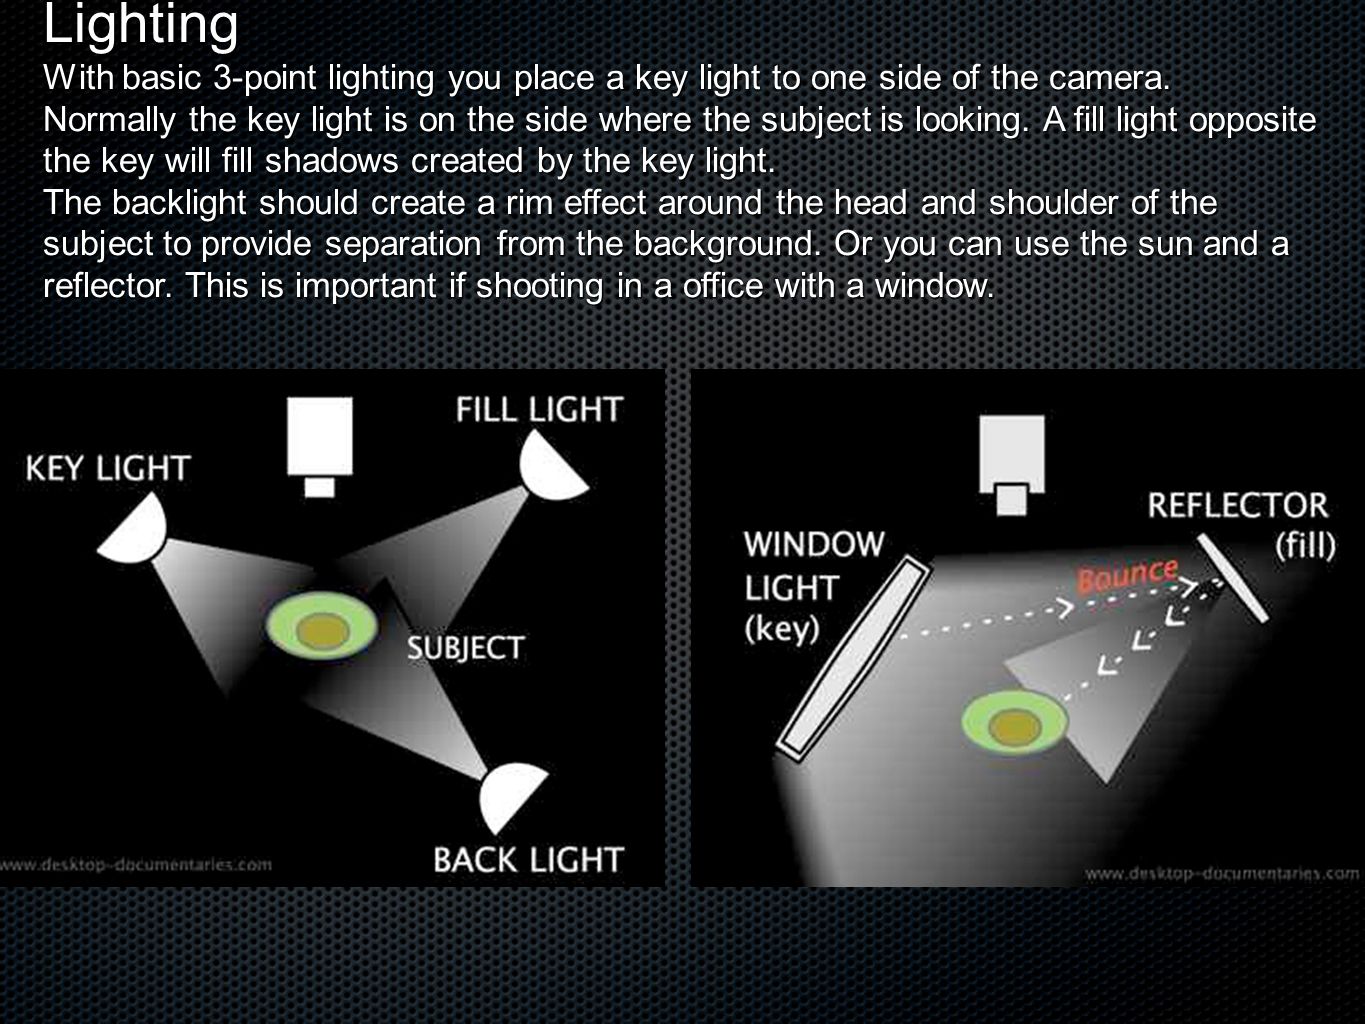 Lighting With basic 3-point lighting you place a key light to one side of the camera.